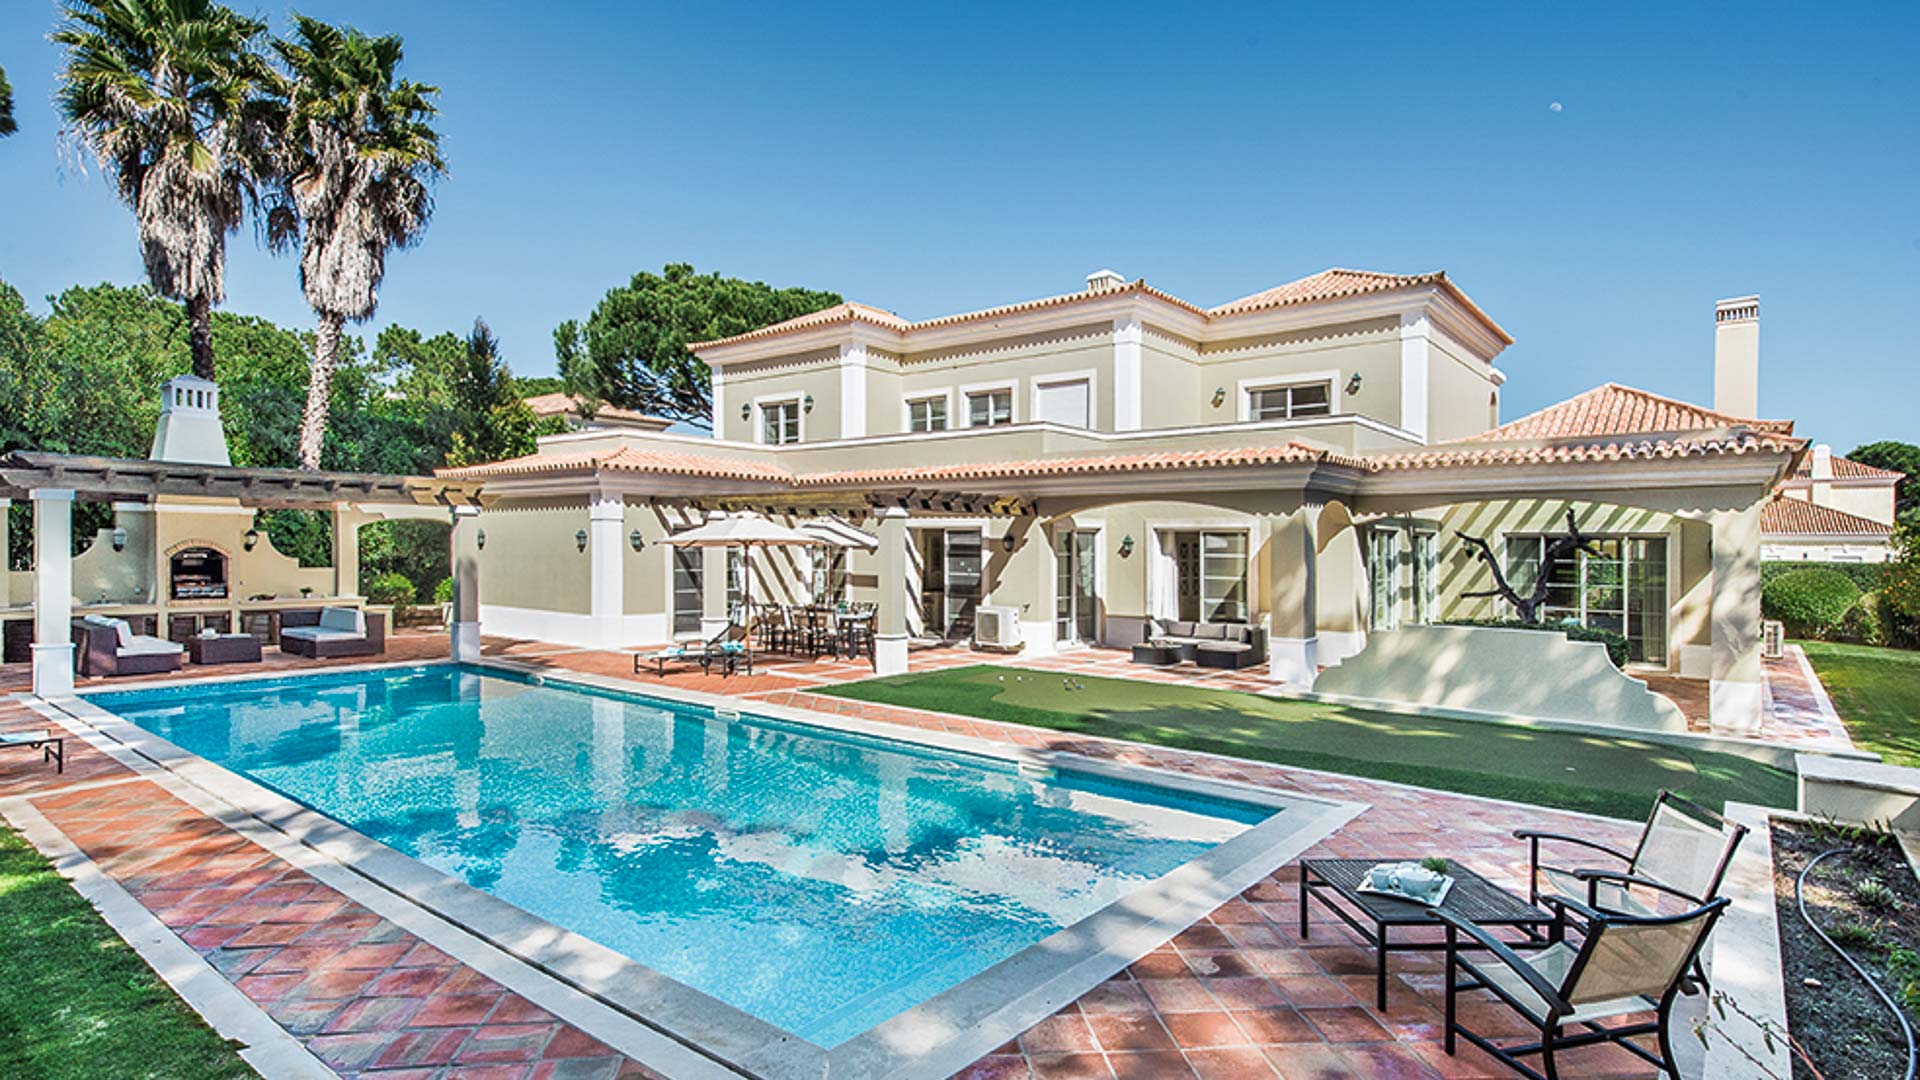 Property Image 1 - Classic Quinta do Lago Villa with Putting Green and Pool